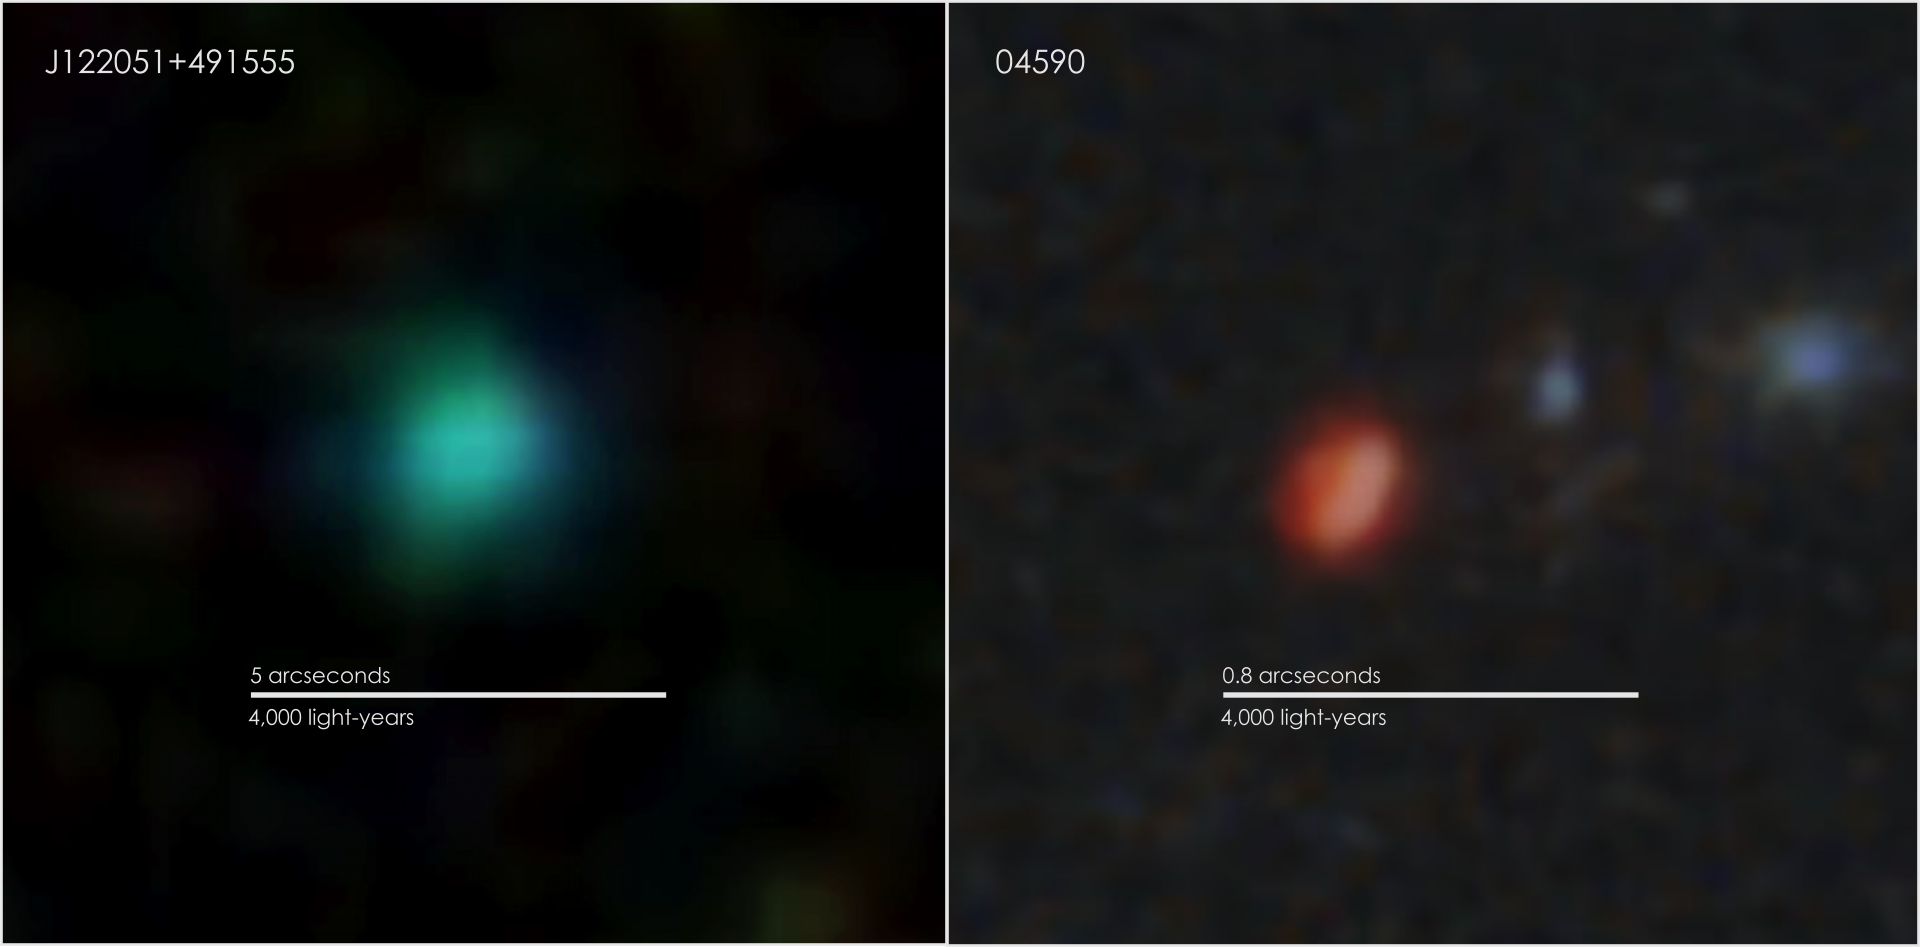 A round green galaxy seen nearby is compared to a small red dot seen in the infrared by the James Webb Space Telescope. A scale bar shows a distance of 4,000 light-years for both.